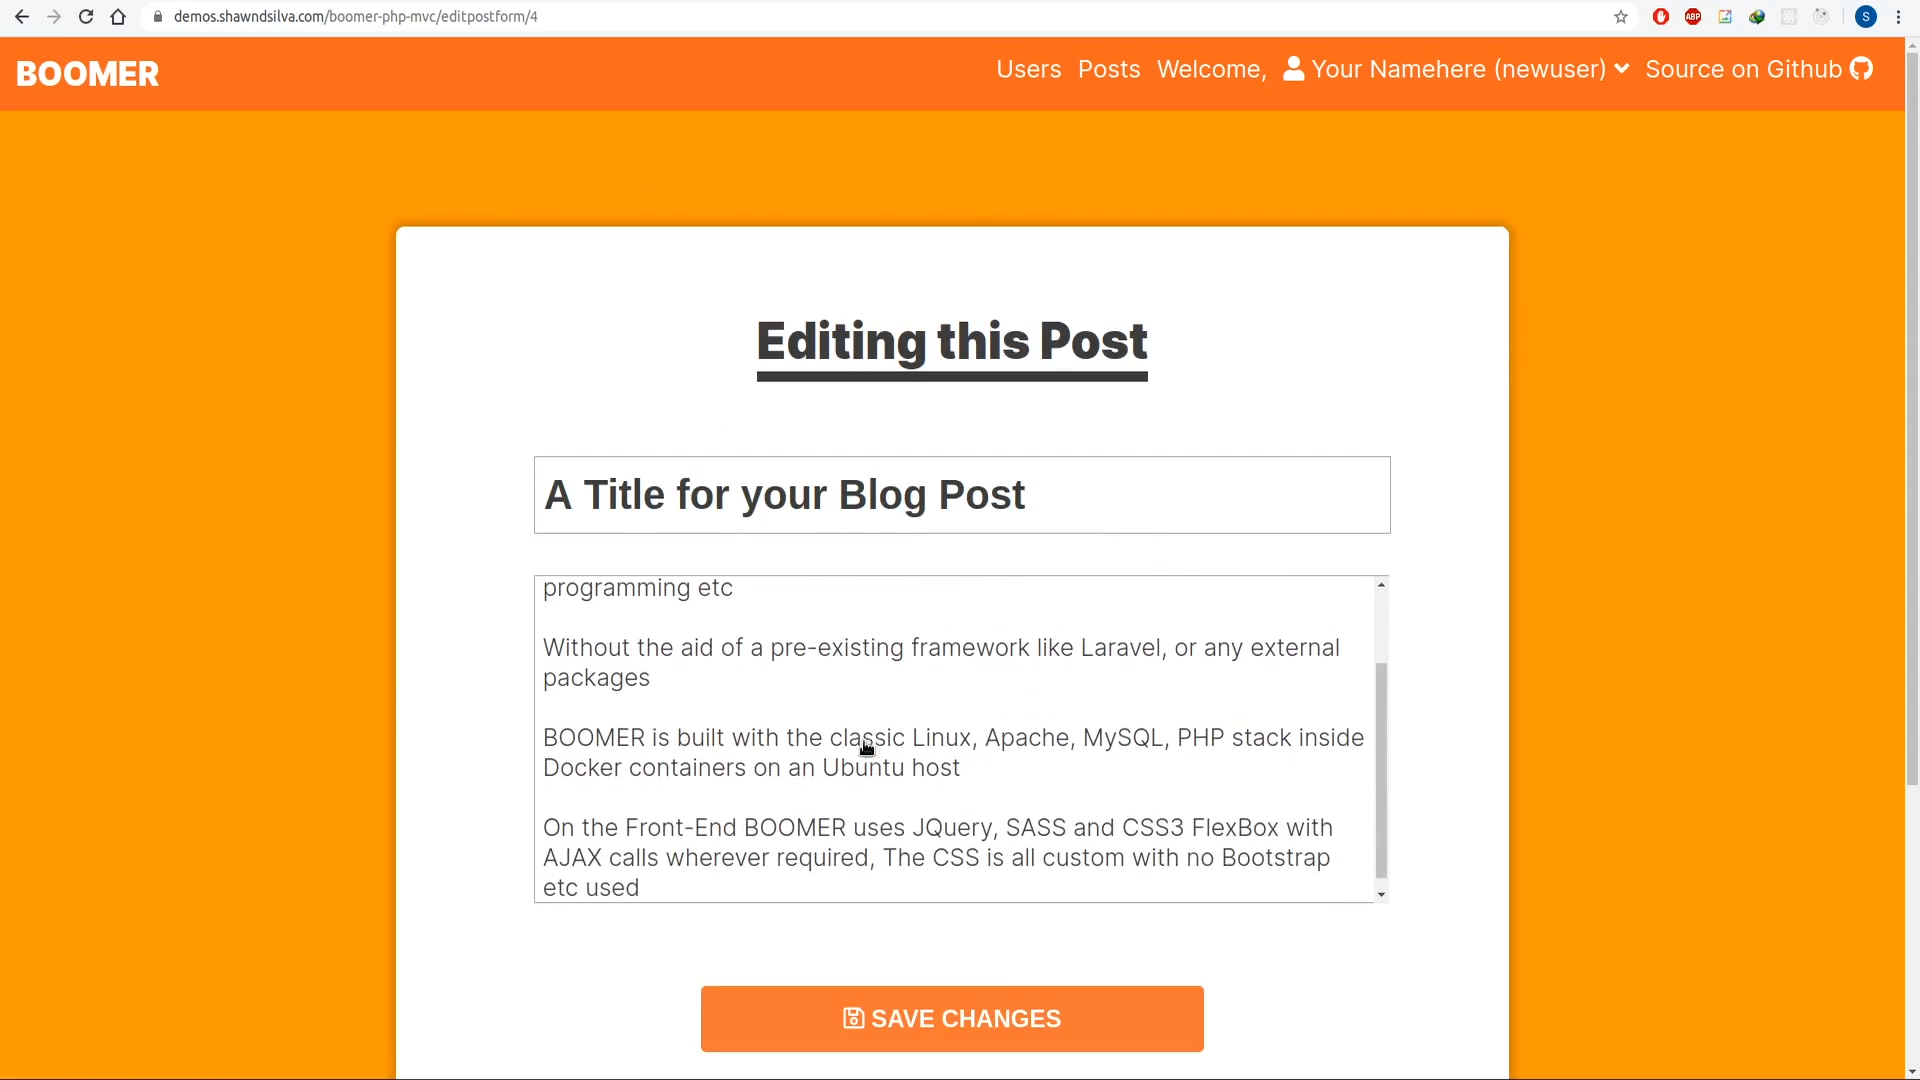  Edit your existing blog post